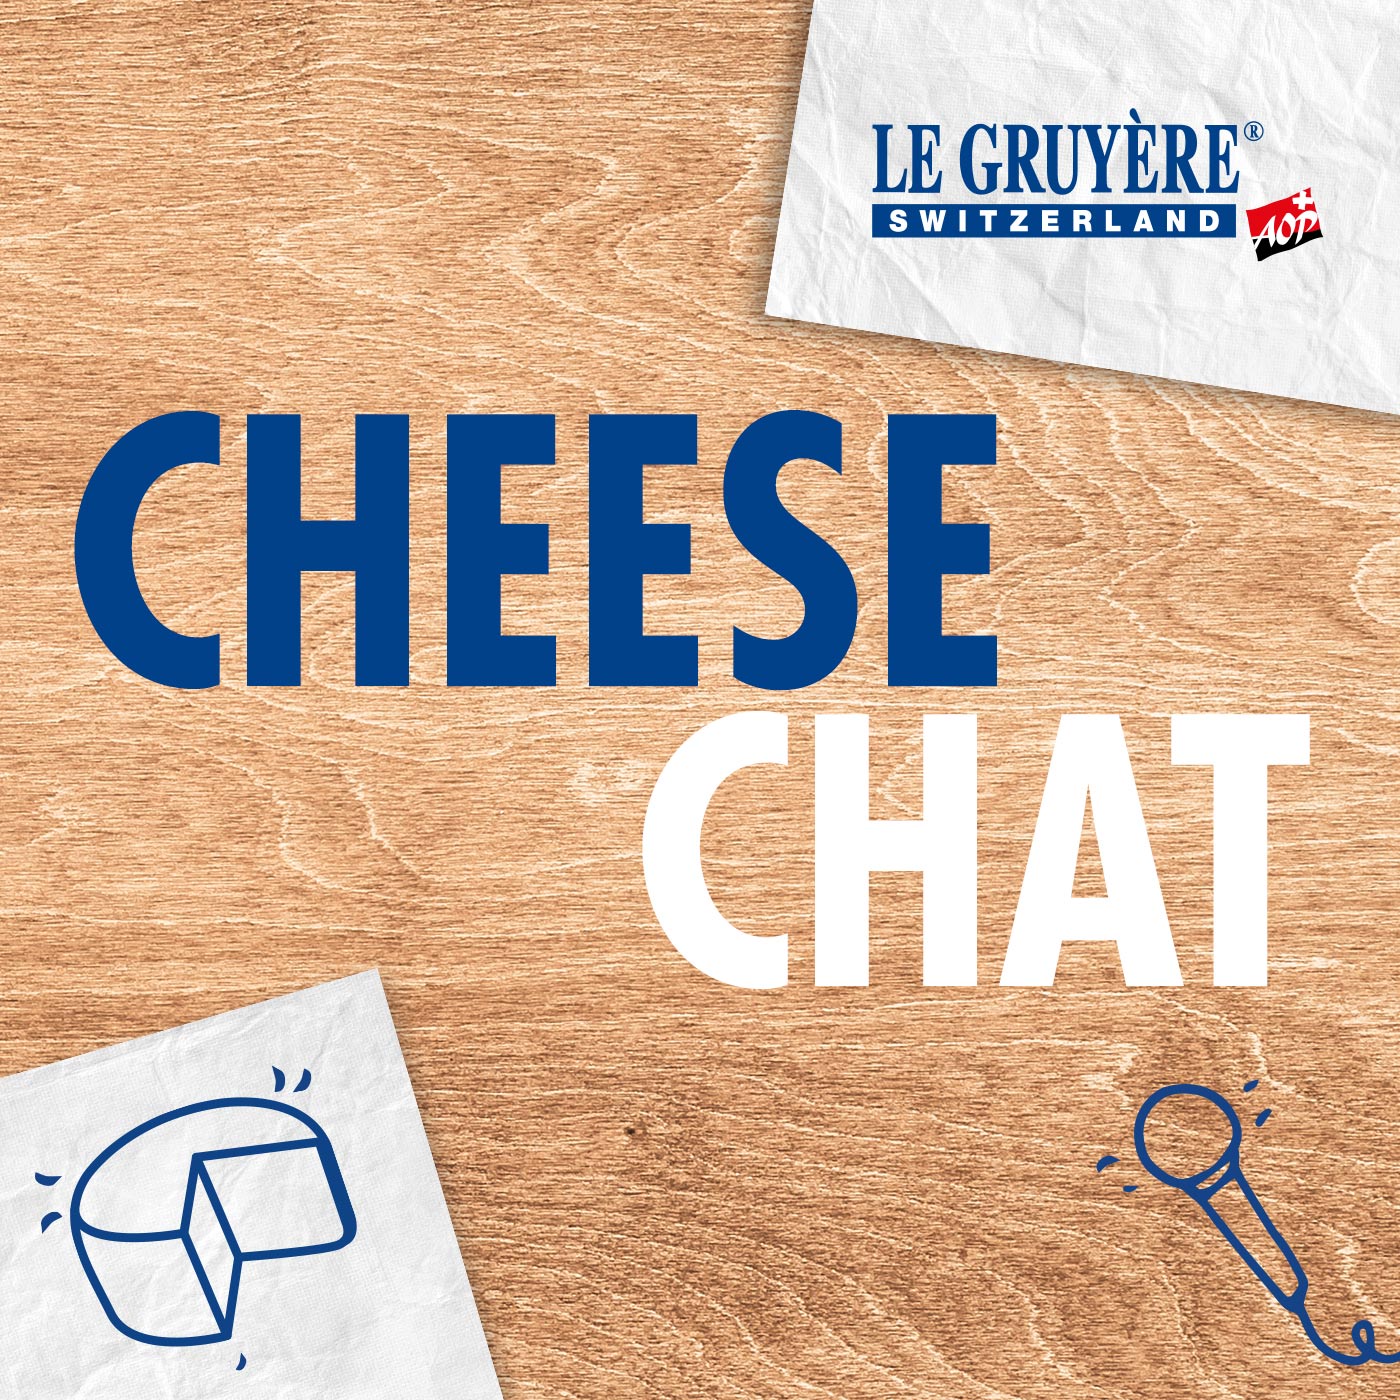 Being a Gruyère AOP cheesemaker: a mix between tradition and modernity.